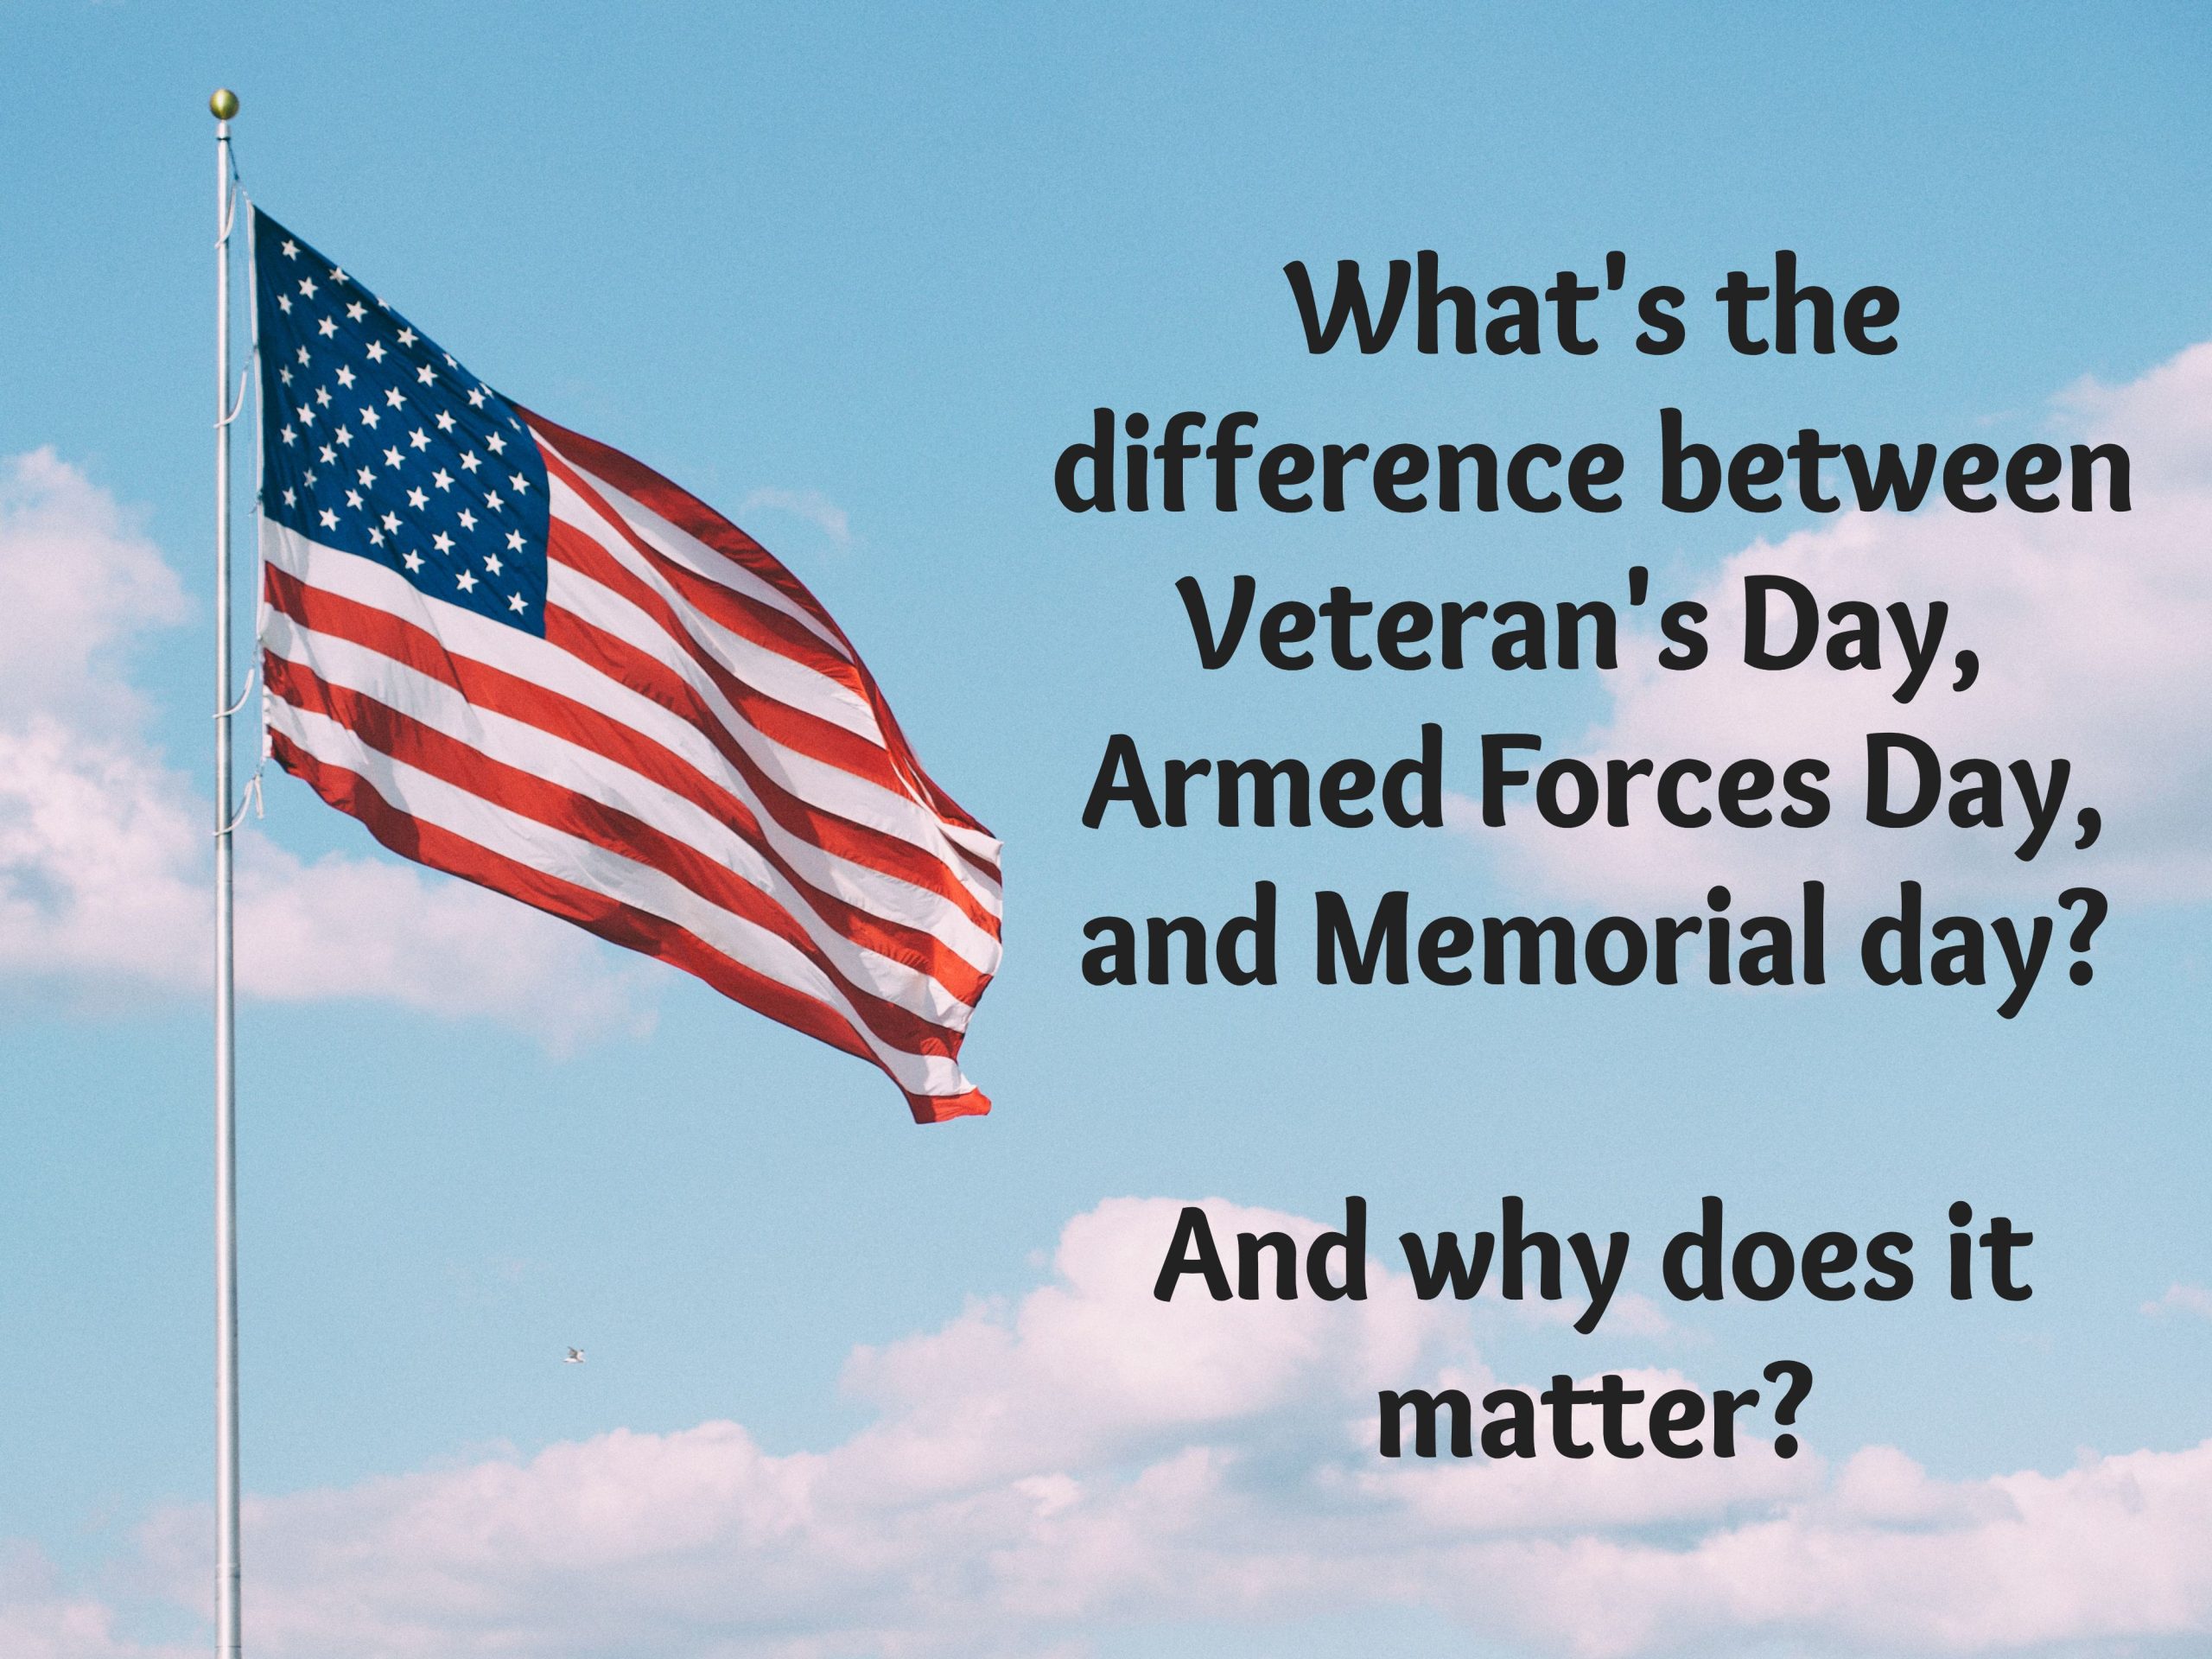 Veteran's Day, Armed Forces Day, Memorial Day: What's the